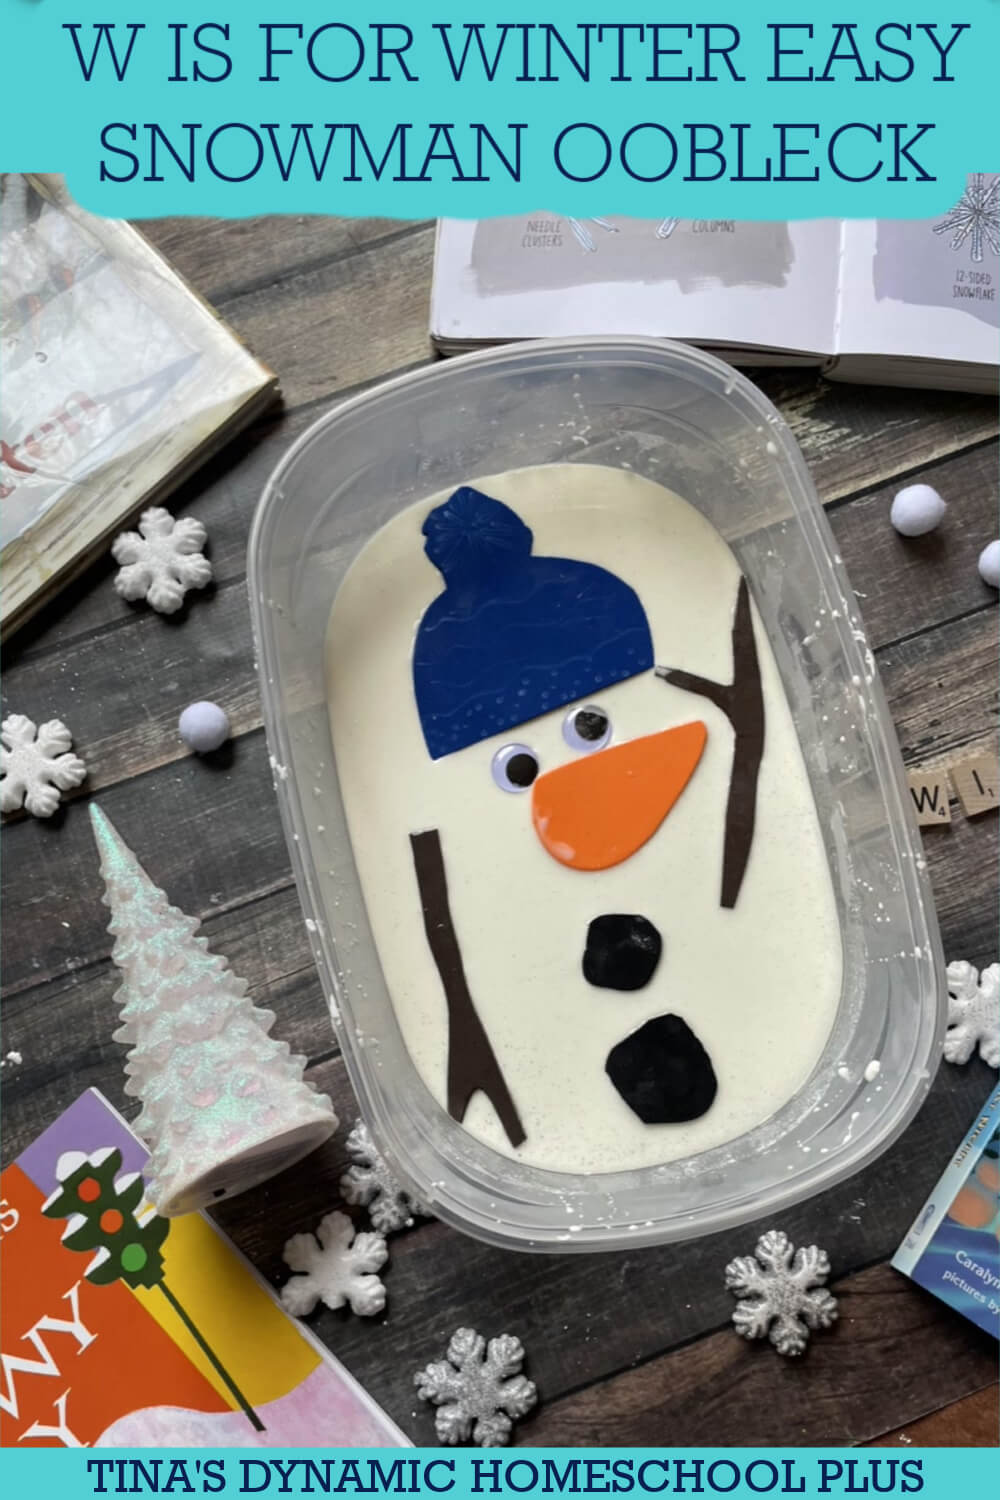 DIY Snowman Kit: Cute and Easy Snowman Pieces Gift FREE PRINTABLE 2018 